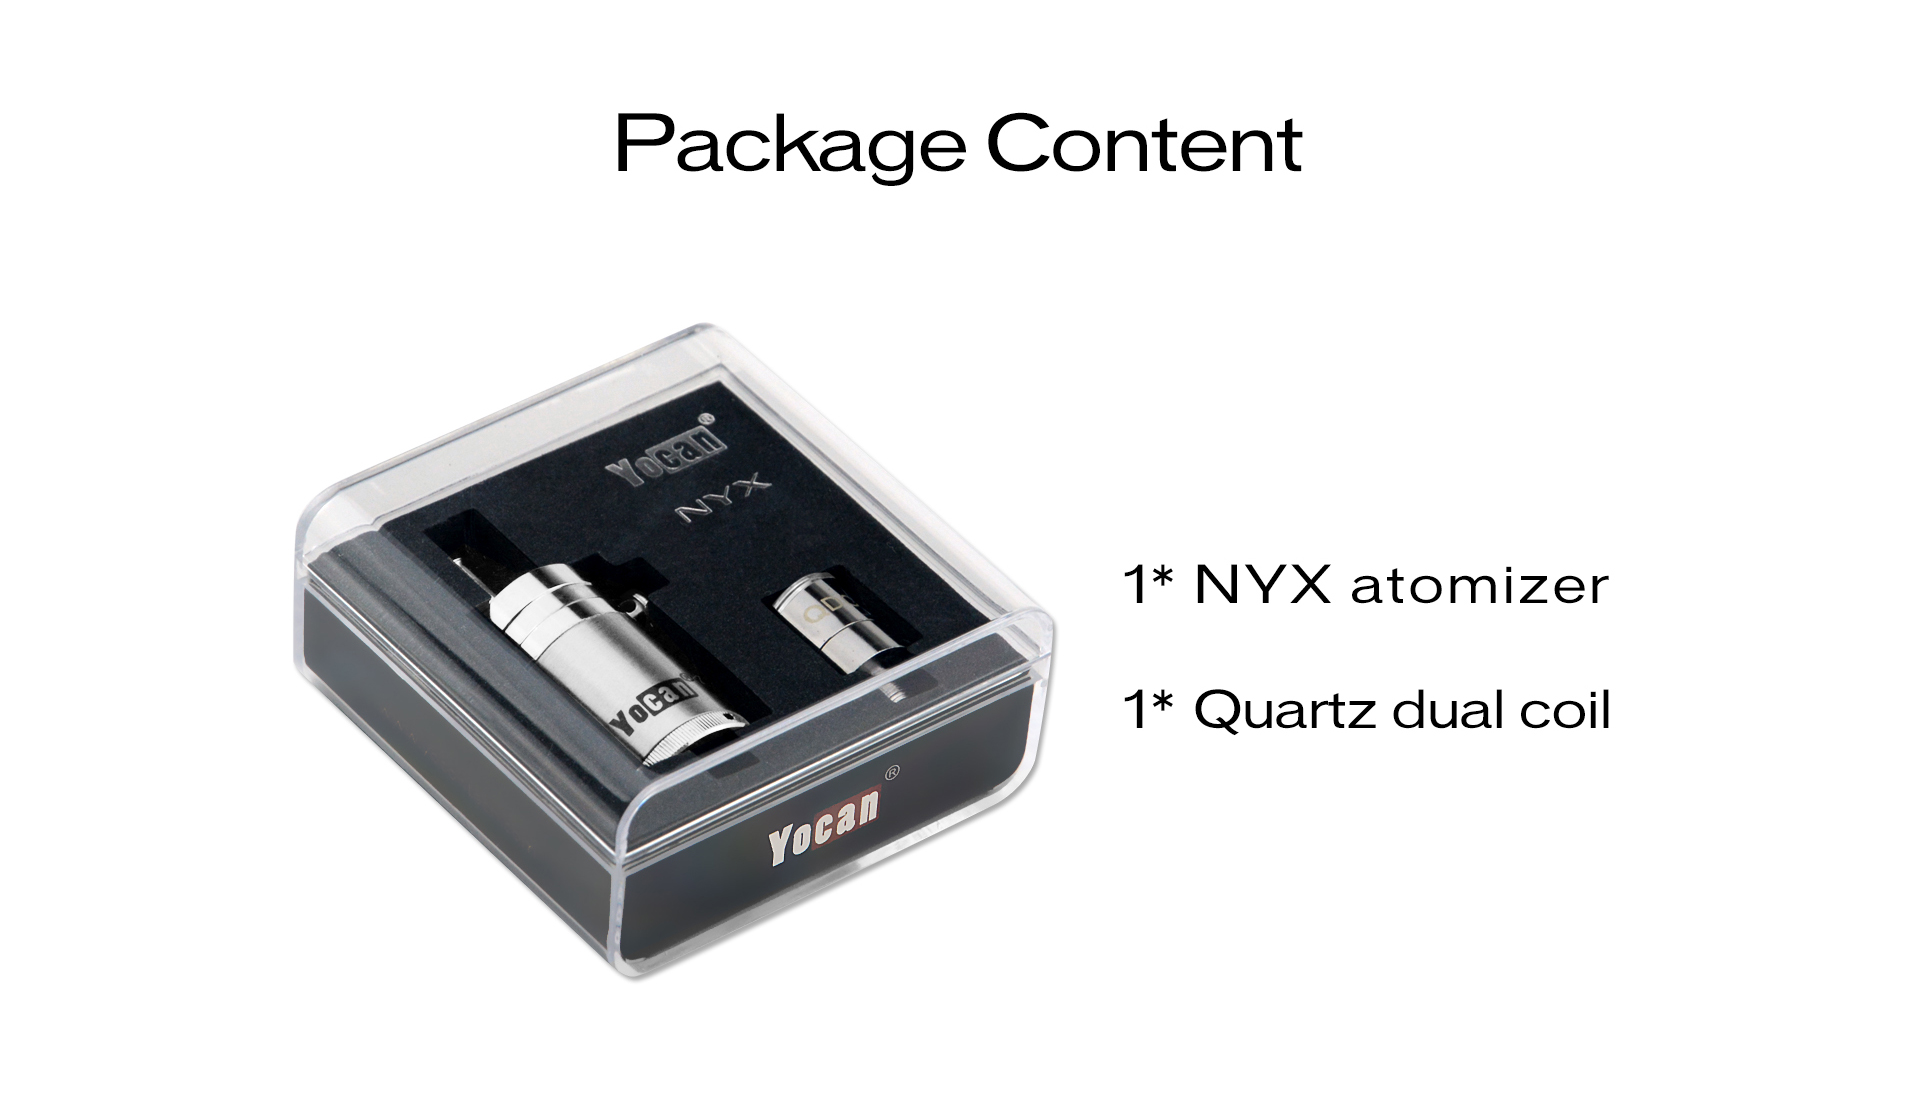 The Yocan NYX Quartz Dual Coil Wax Atomizer package content.